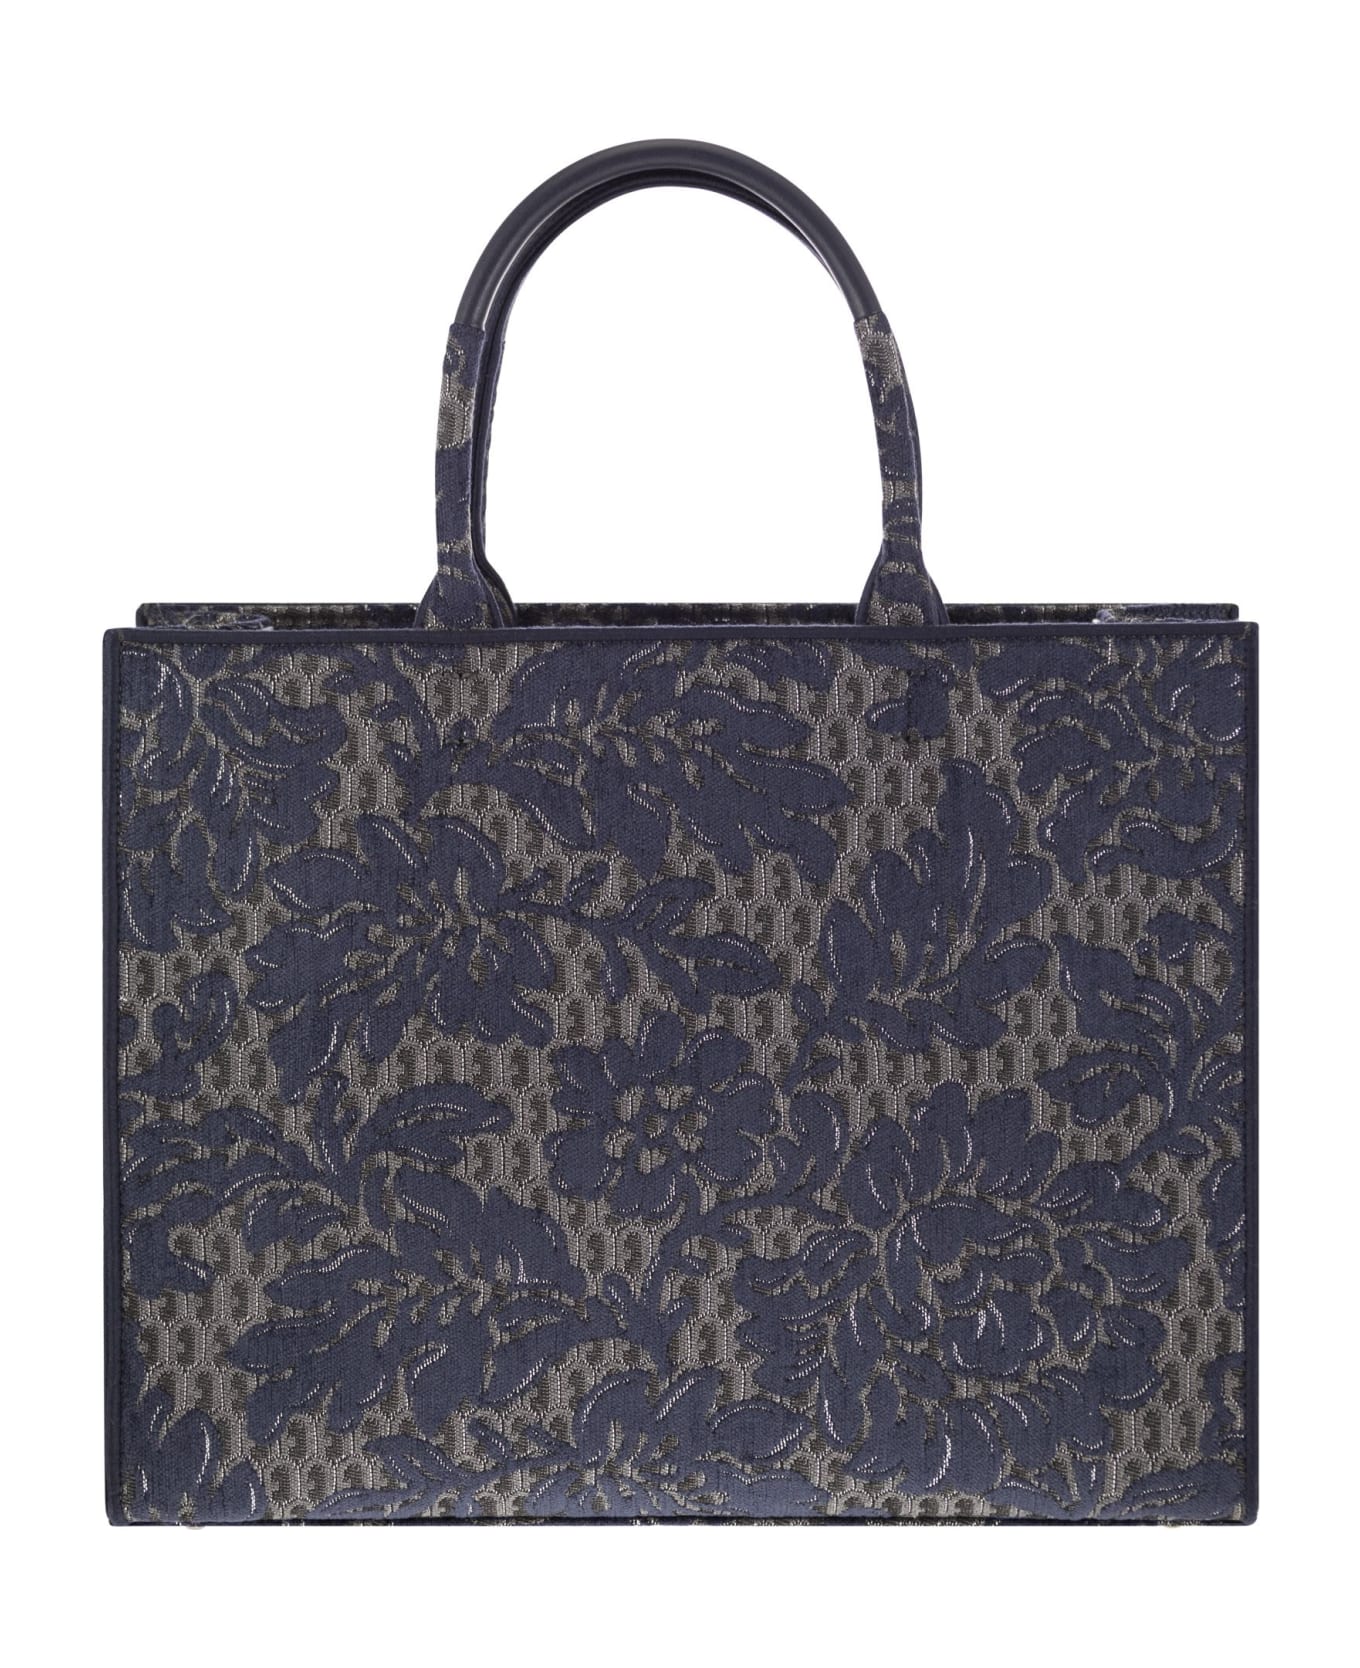 Furla Opportunity - Tote Bag - Blue トートバッグ